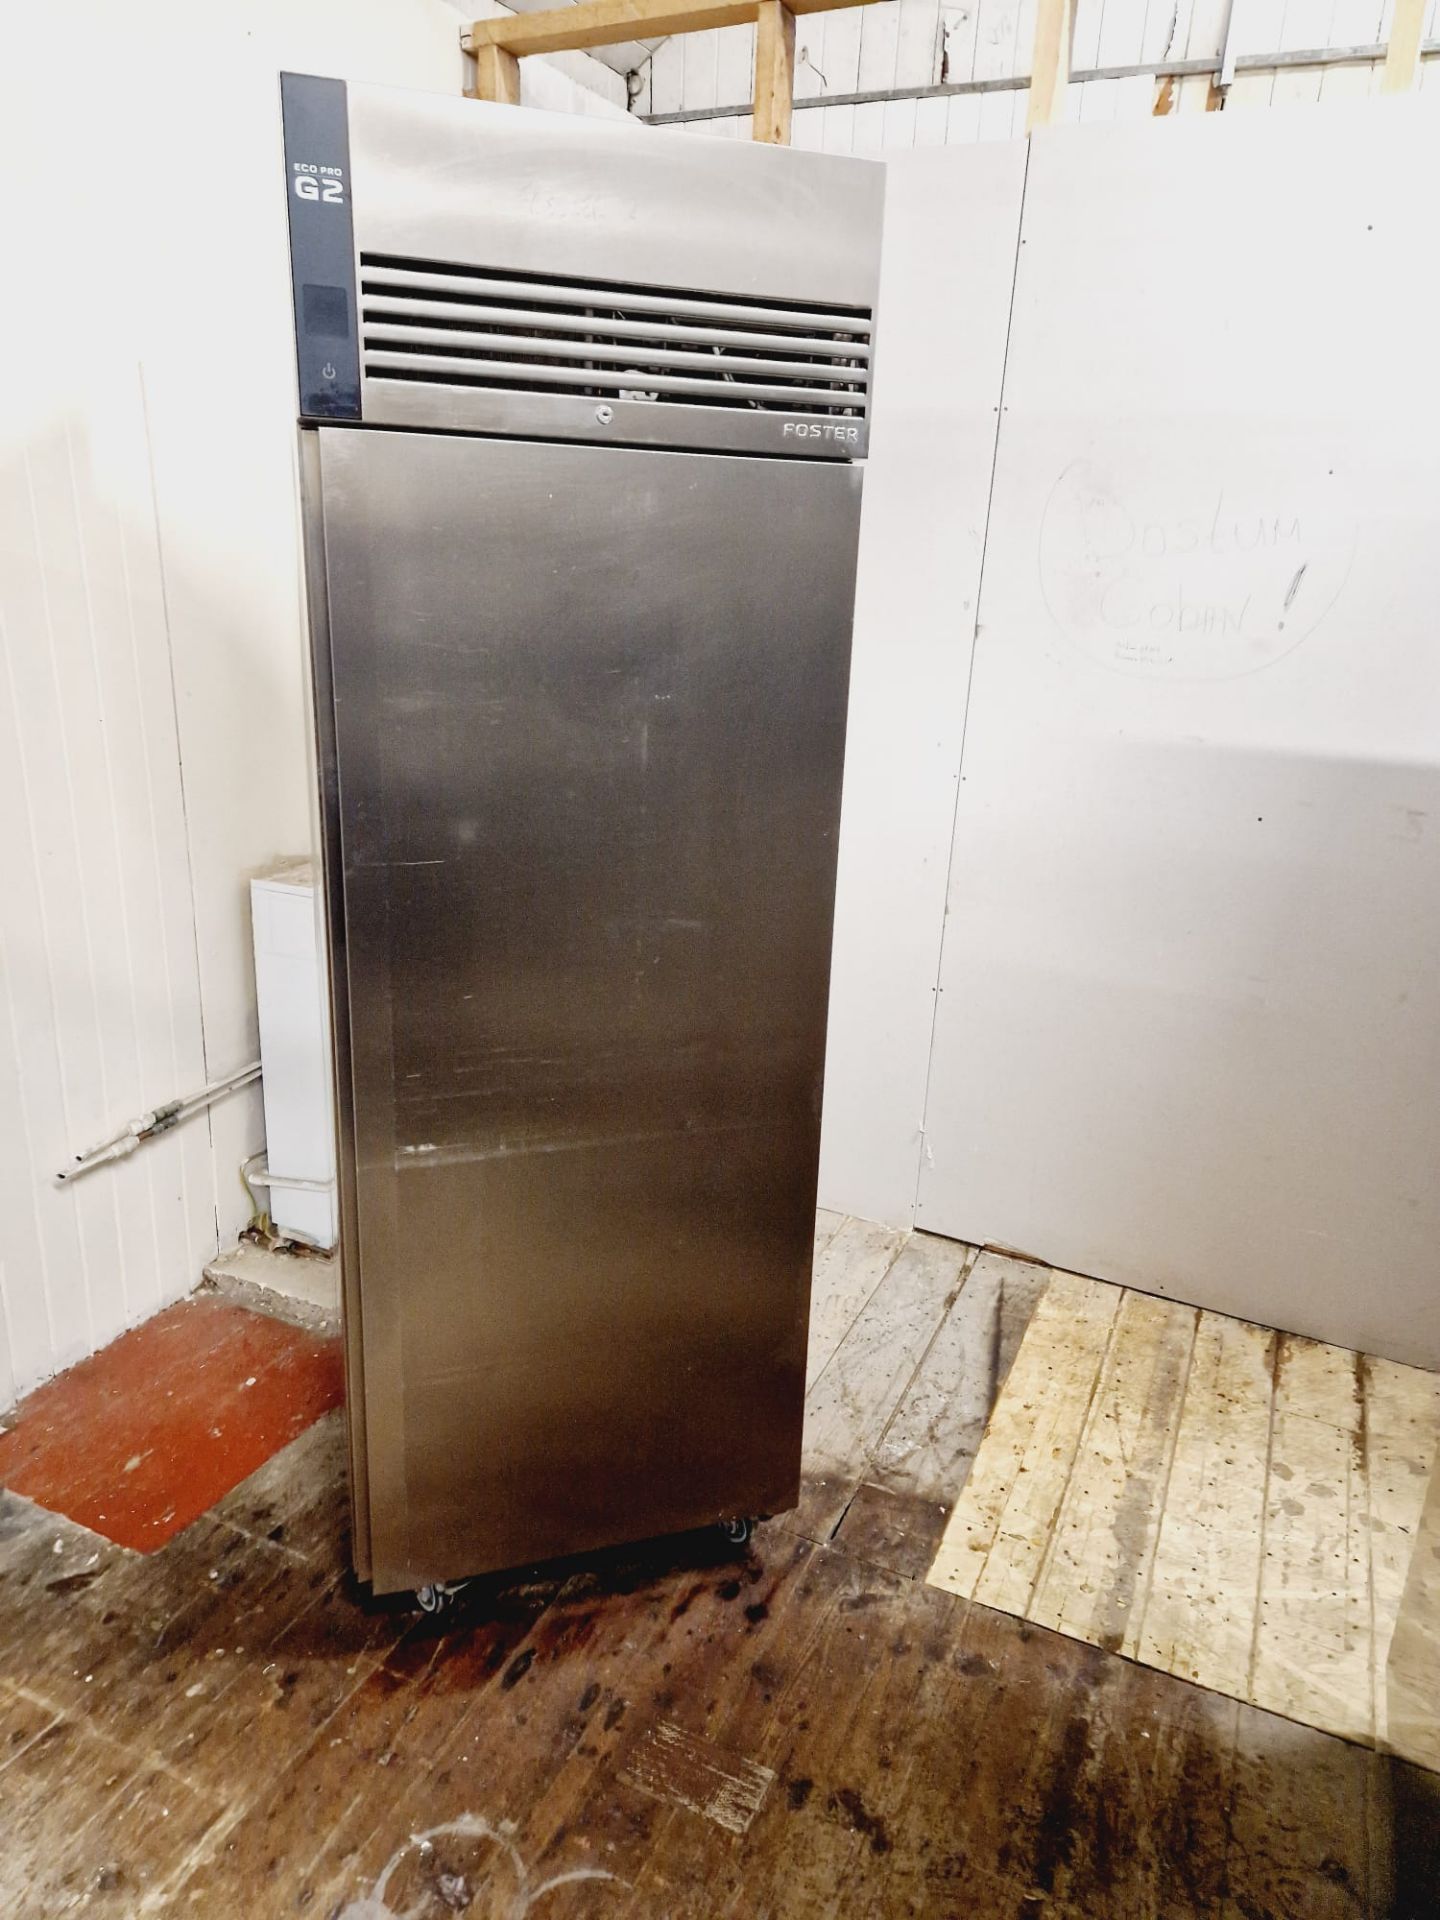 FOSTER G2 UPRIGHT FRIDGE - FULLY WORKING AND SERVICED - Image 3 of 3